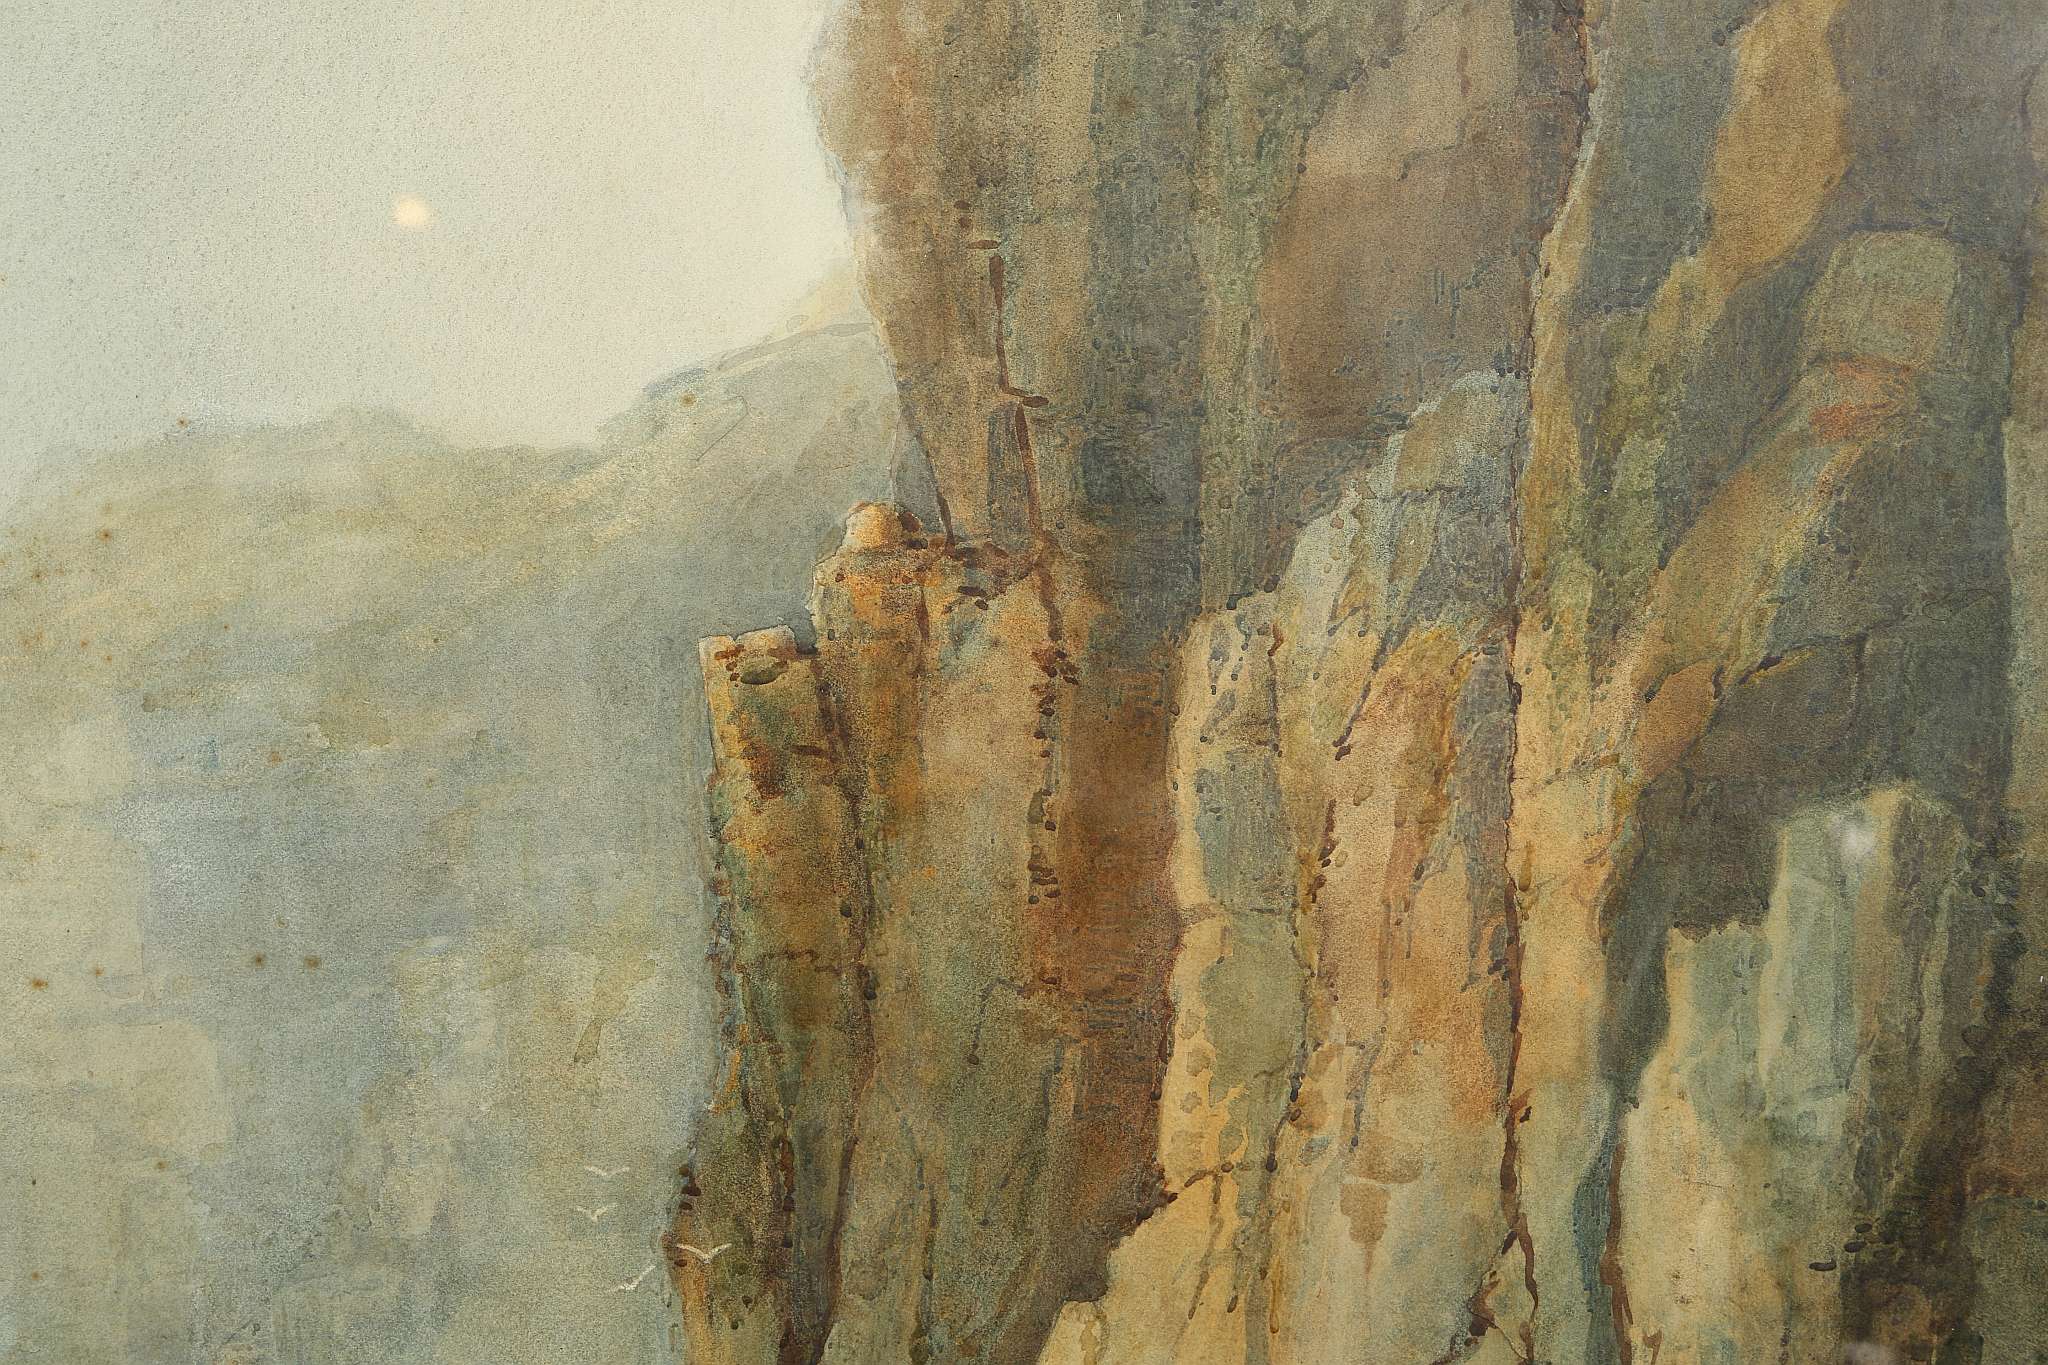 Reginald Smith 1855-1925, 'Sea Cliffs', a large marine watercolour showing crashing waves and bird - Image 4 of 7